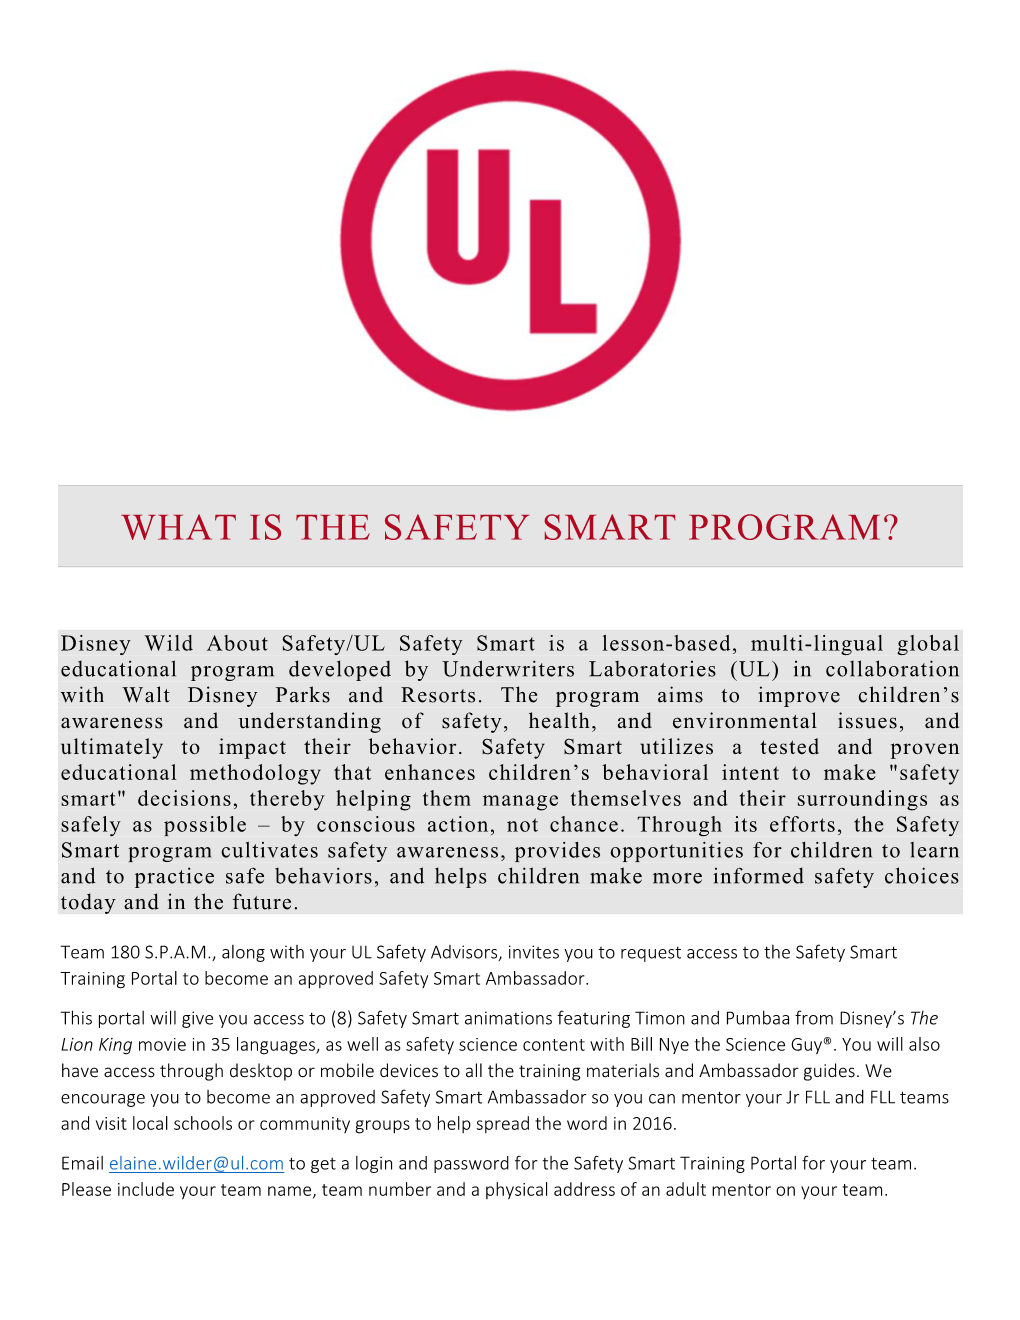 What Is the Safety Smart Program?